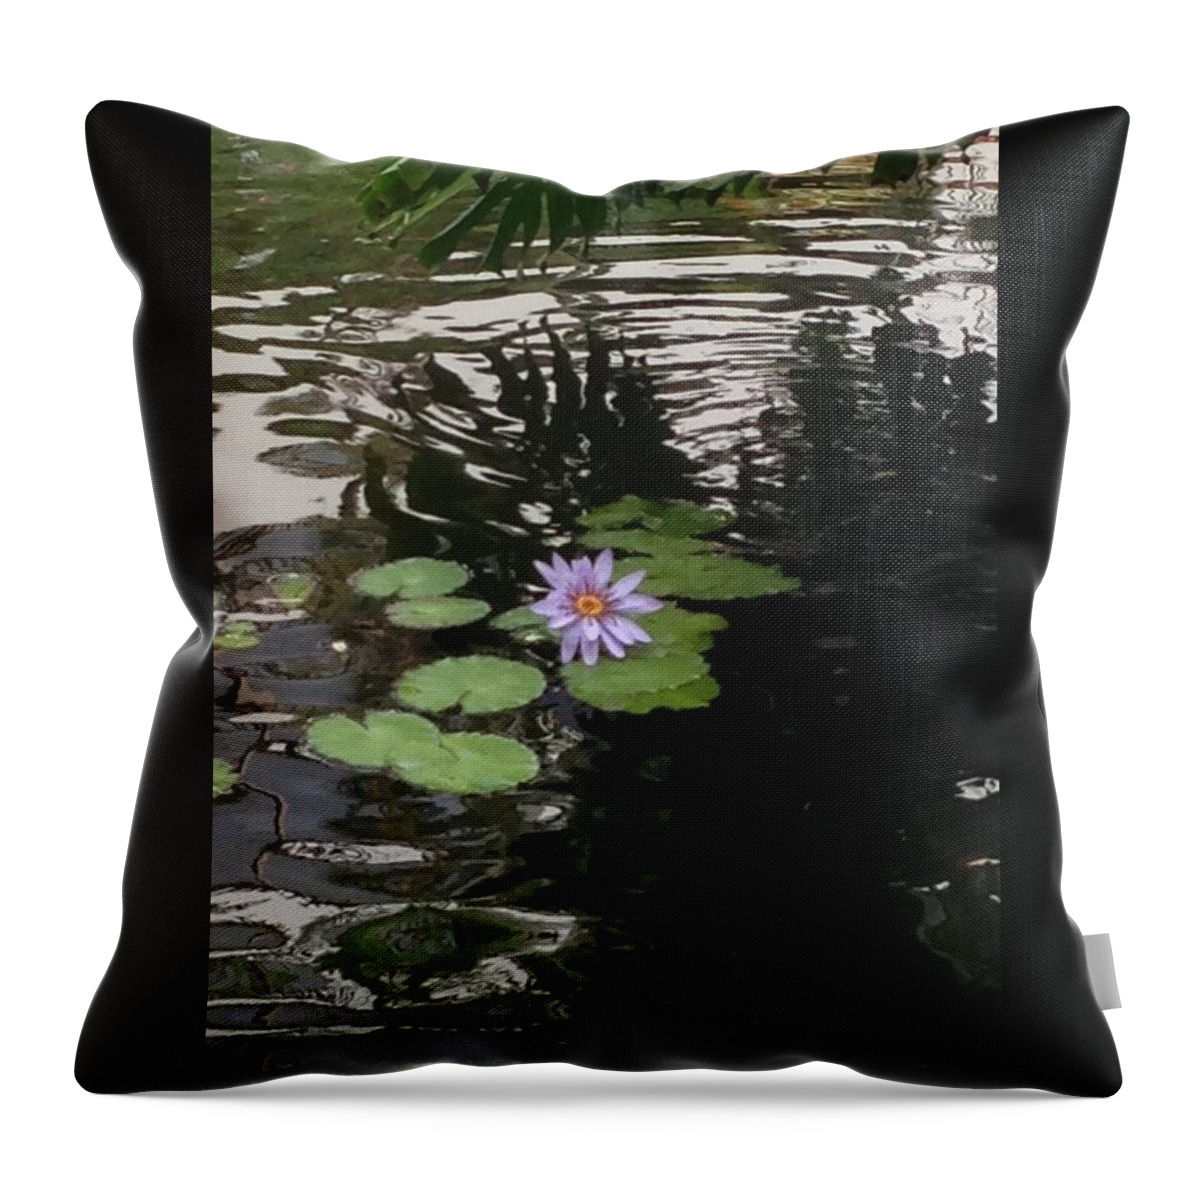 Flower Throw Pillow featuring the photograph Hawaiian Water Lily by Jamie Frier